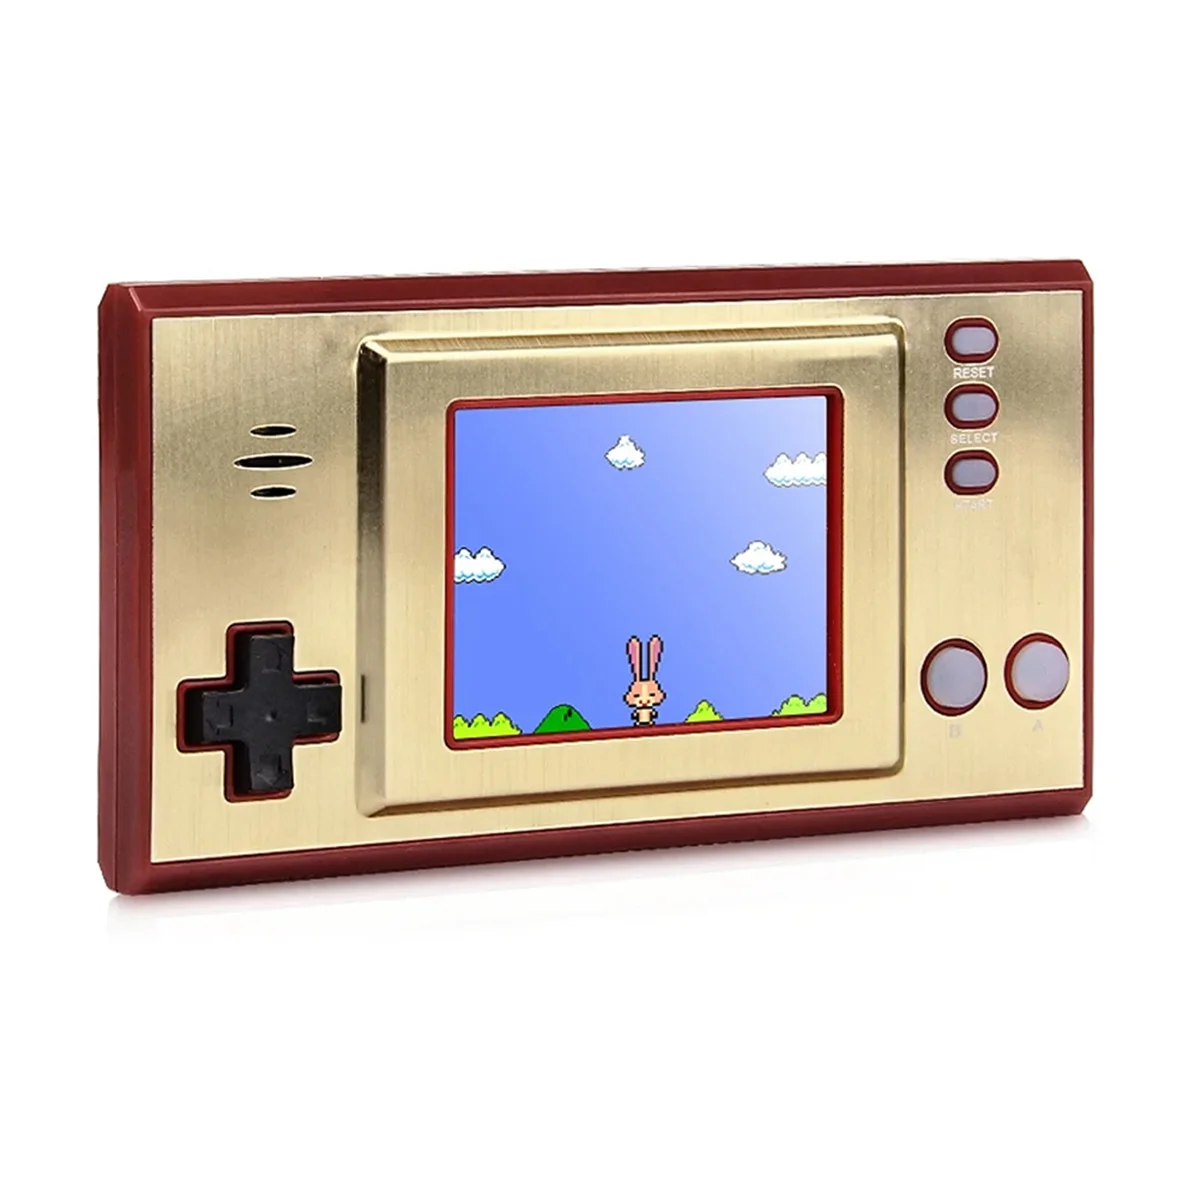 

GB35 Handheld Game Player Built in 620 Classic Games Support AV Output Connect TV Portable Retro Vedio Game Console